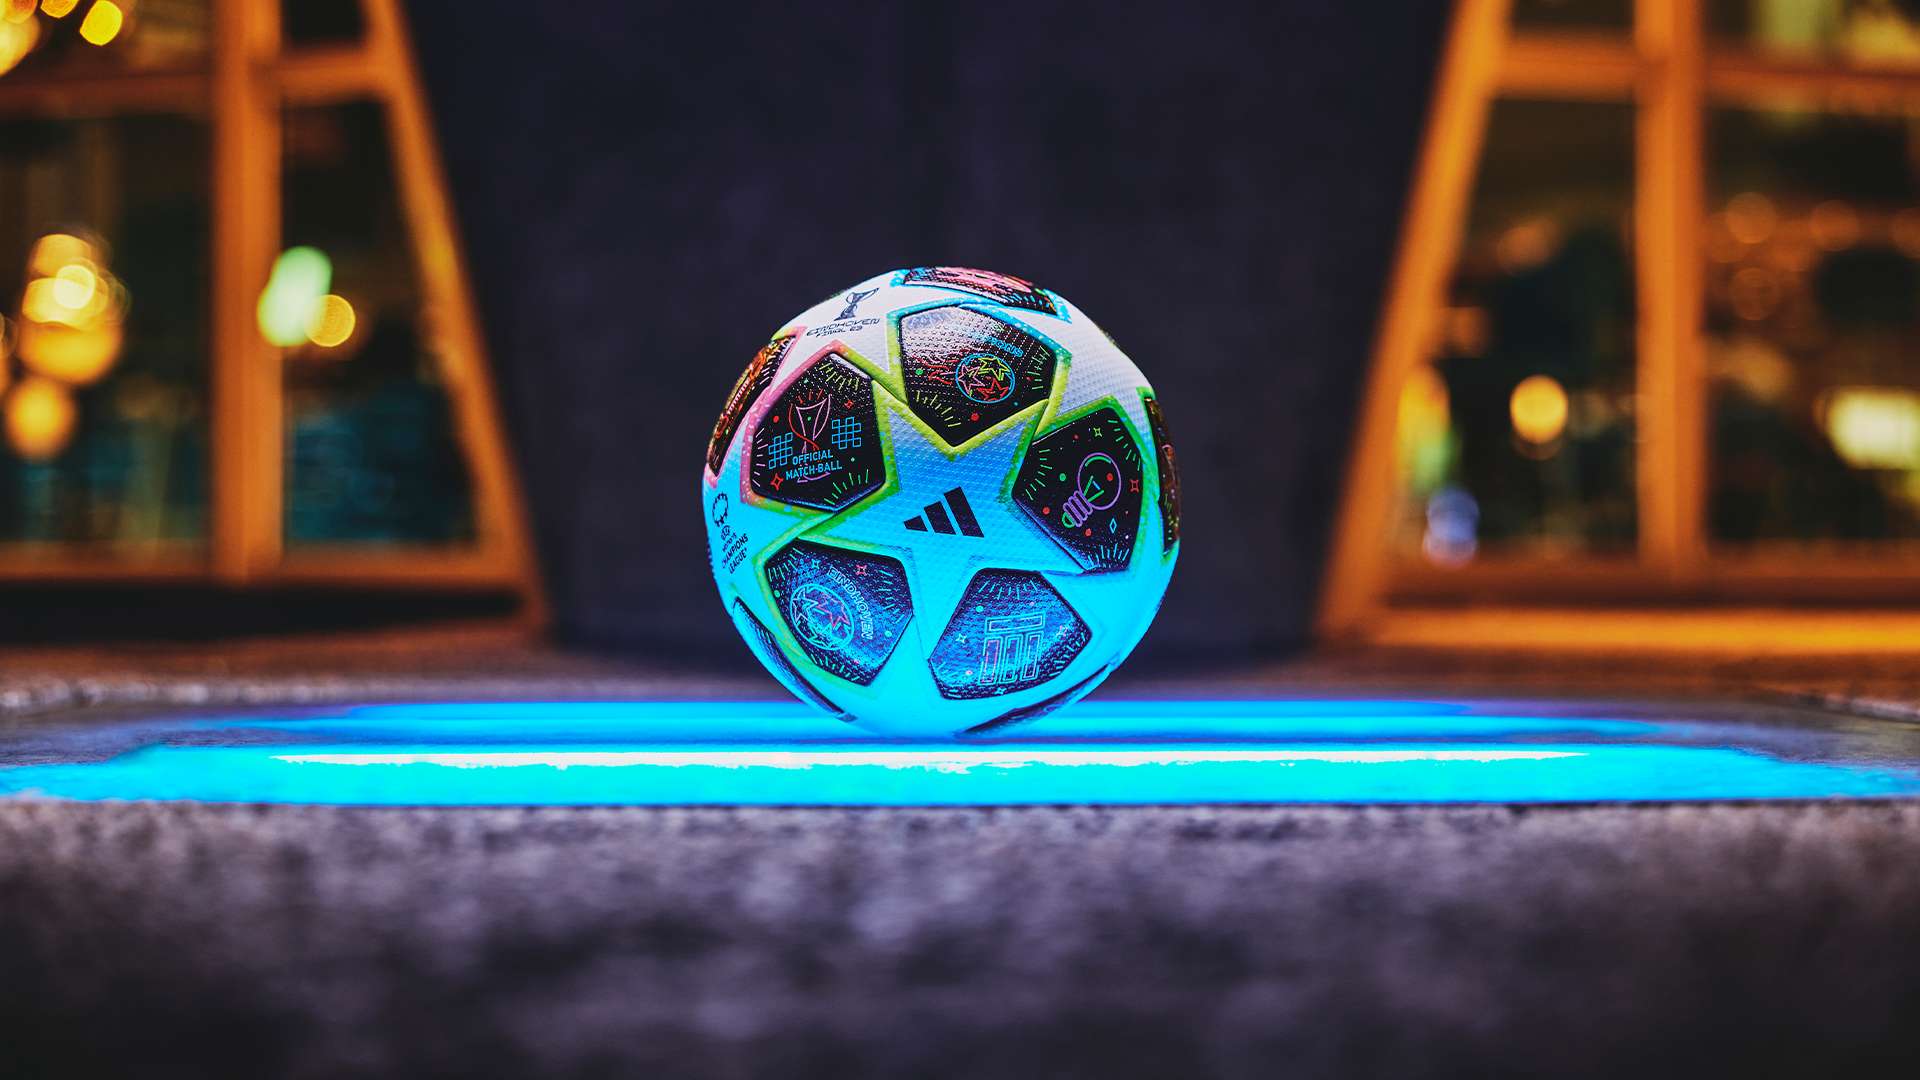 adidas UWCL Pro Ball Eindhoven - closer look